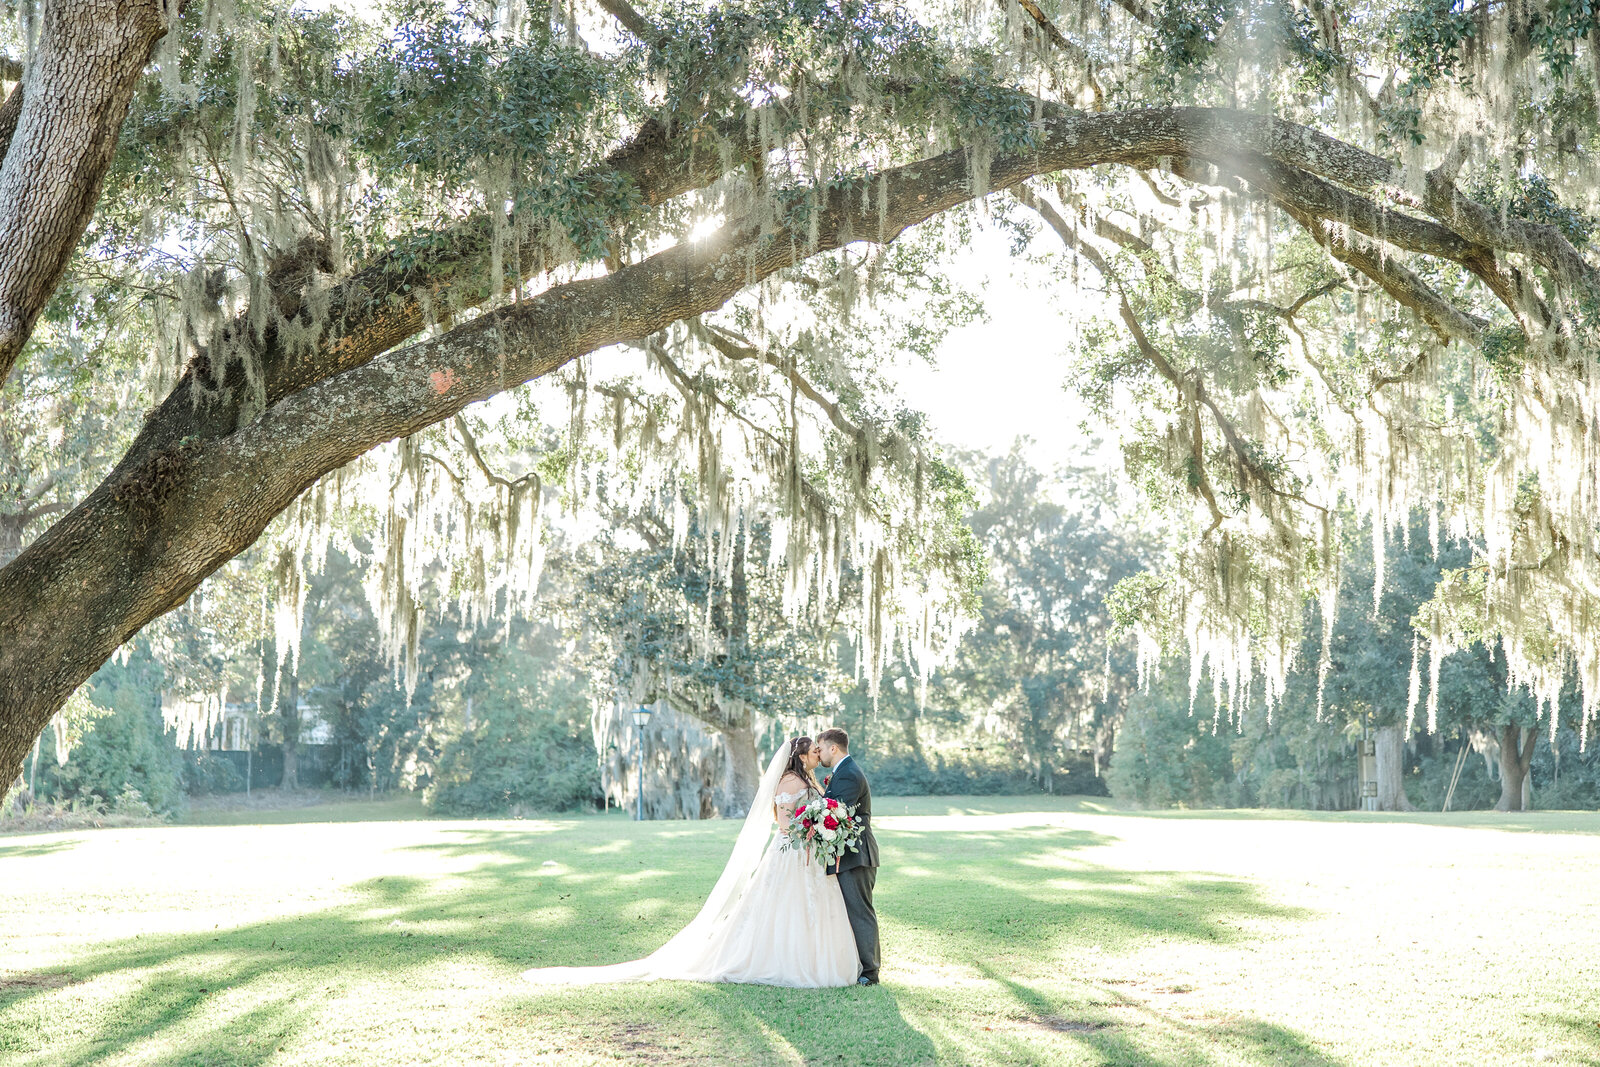 Engaged couple embrace in outdoor Bluffton setting by Karen Schanley.